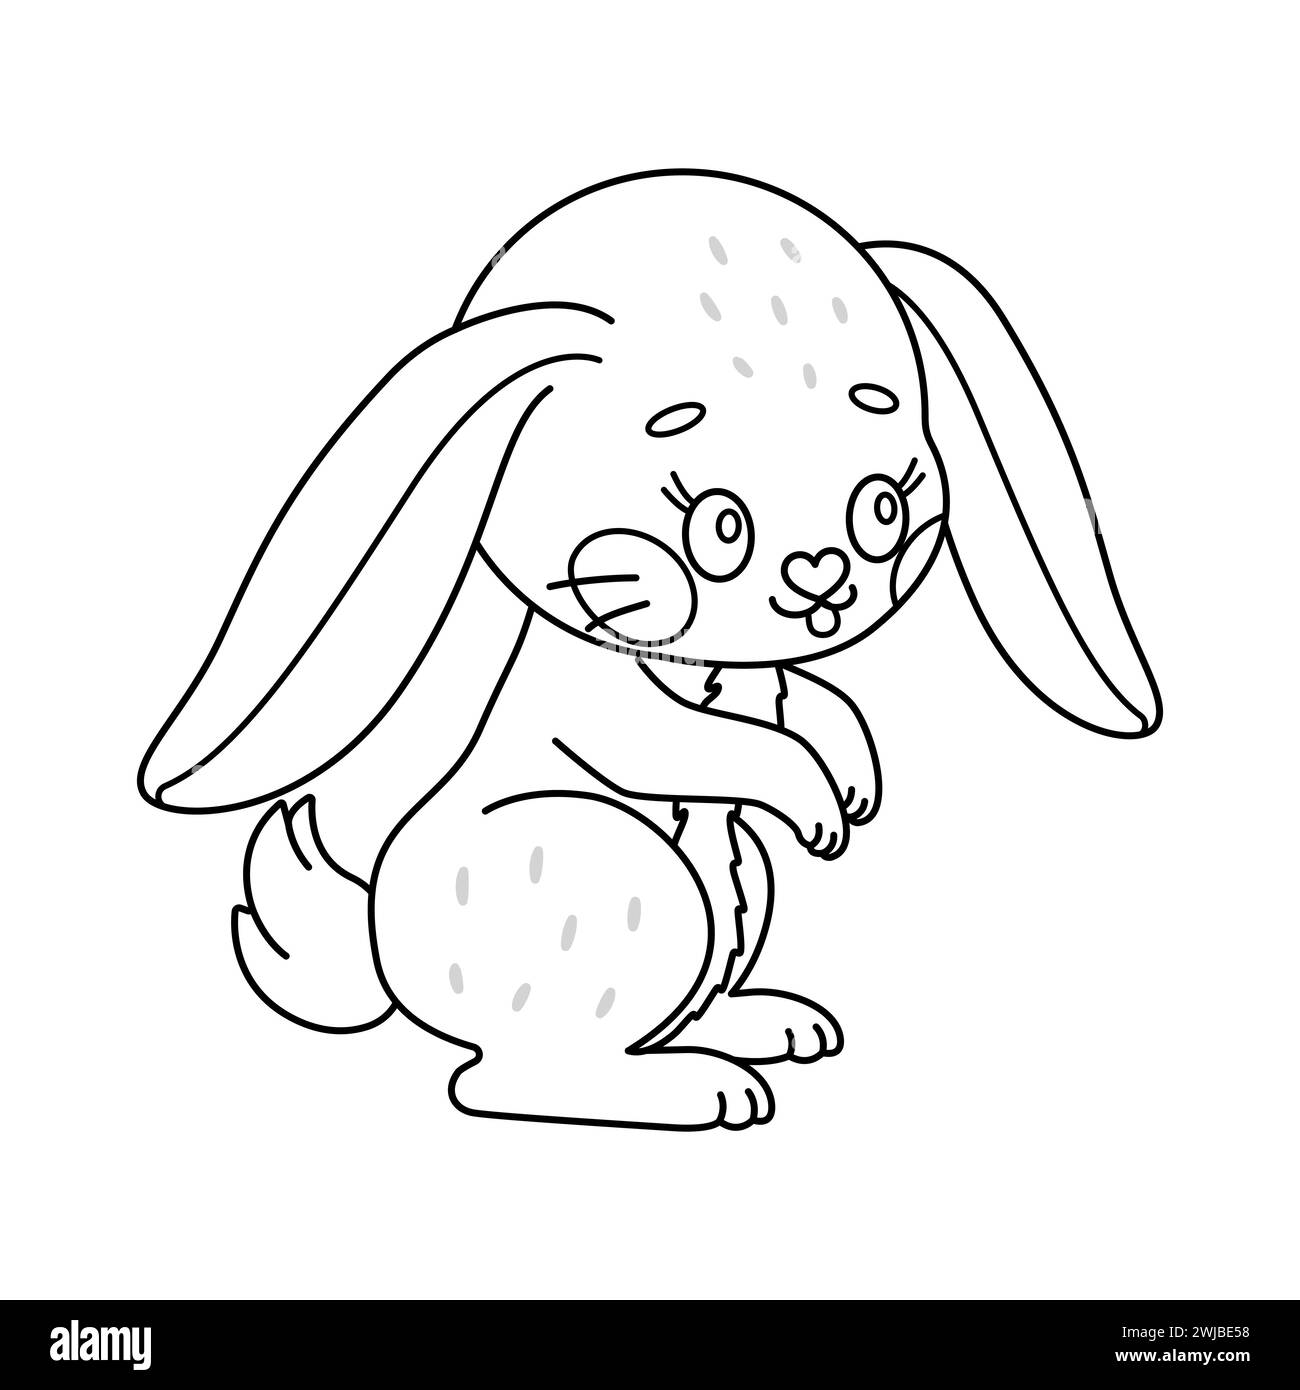 Cartoon easter Bunny. Cute rabbit. Kawaii bunny sitting. Coloring page for kids and adults. Vector illustration. Stock Vector